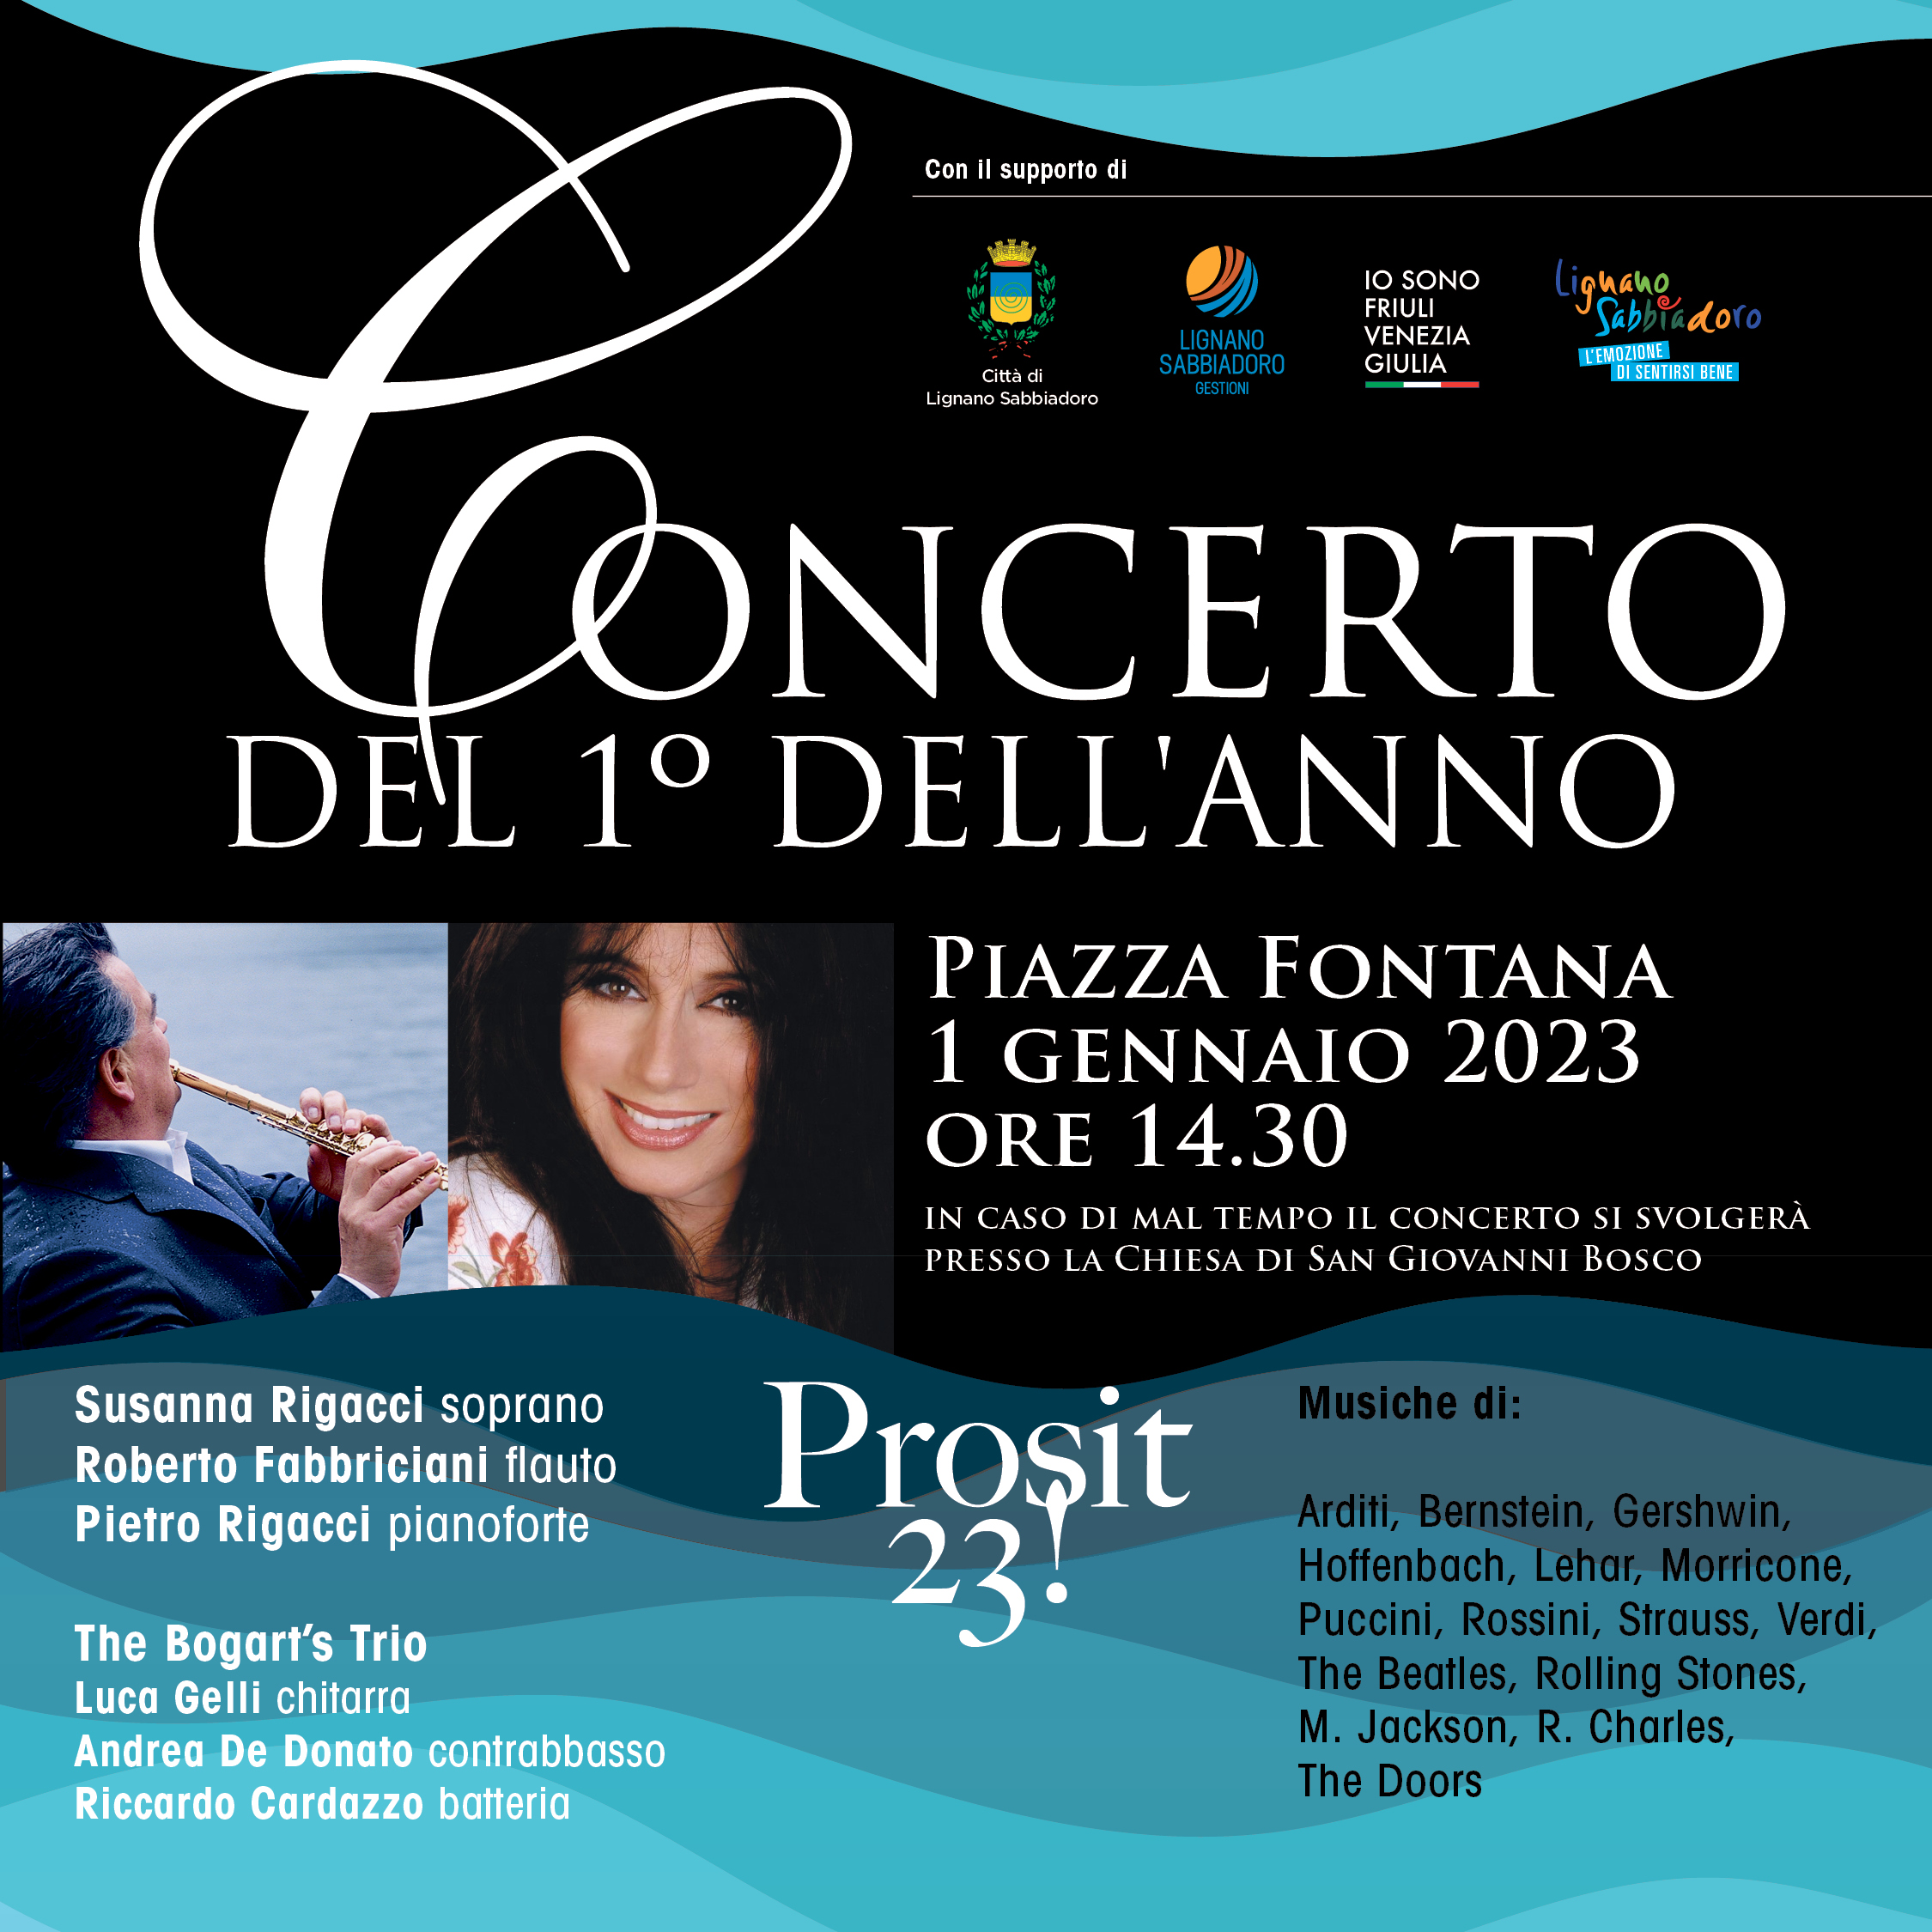 Prosit 23 – Concert on New Year’s Day